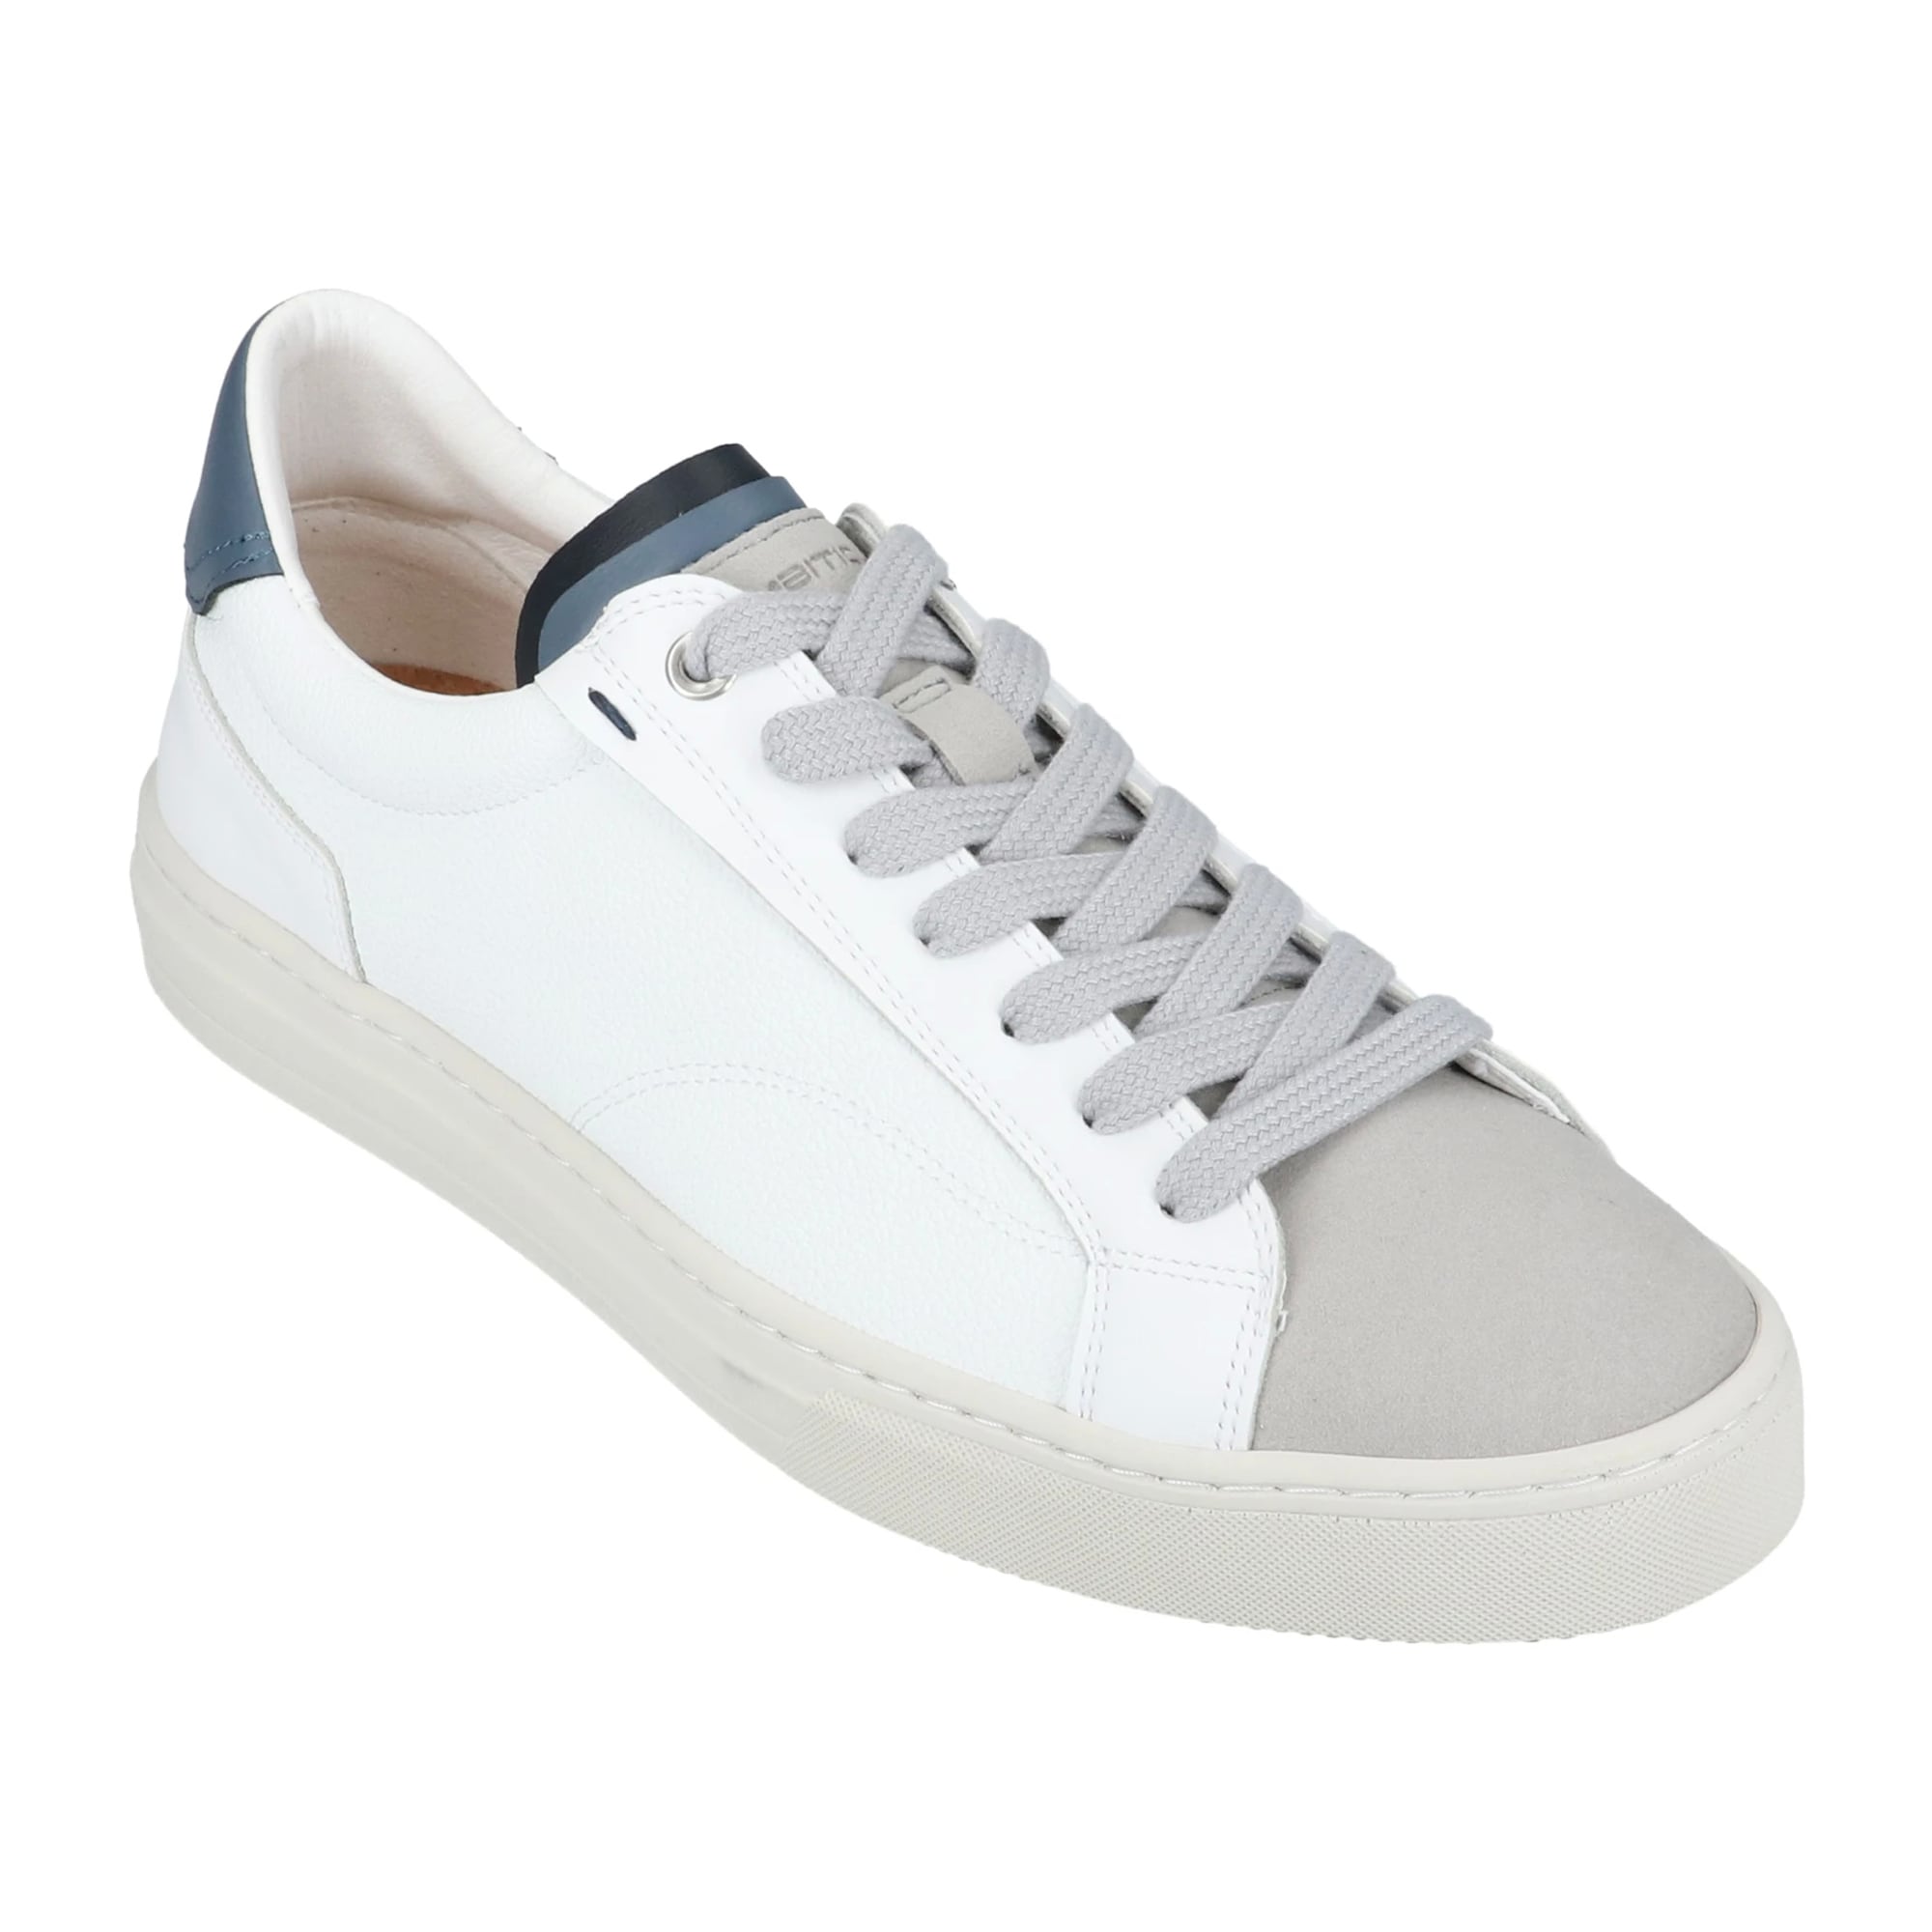 【Ambitious sneakers】 ANOPOLIS HAVEN 074533809